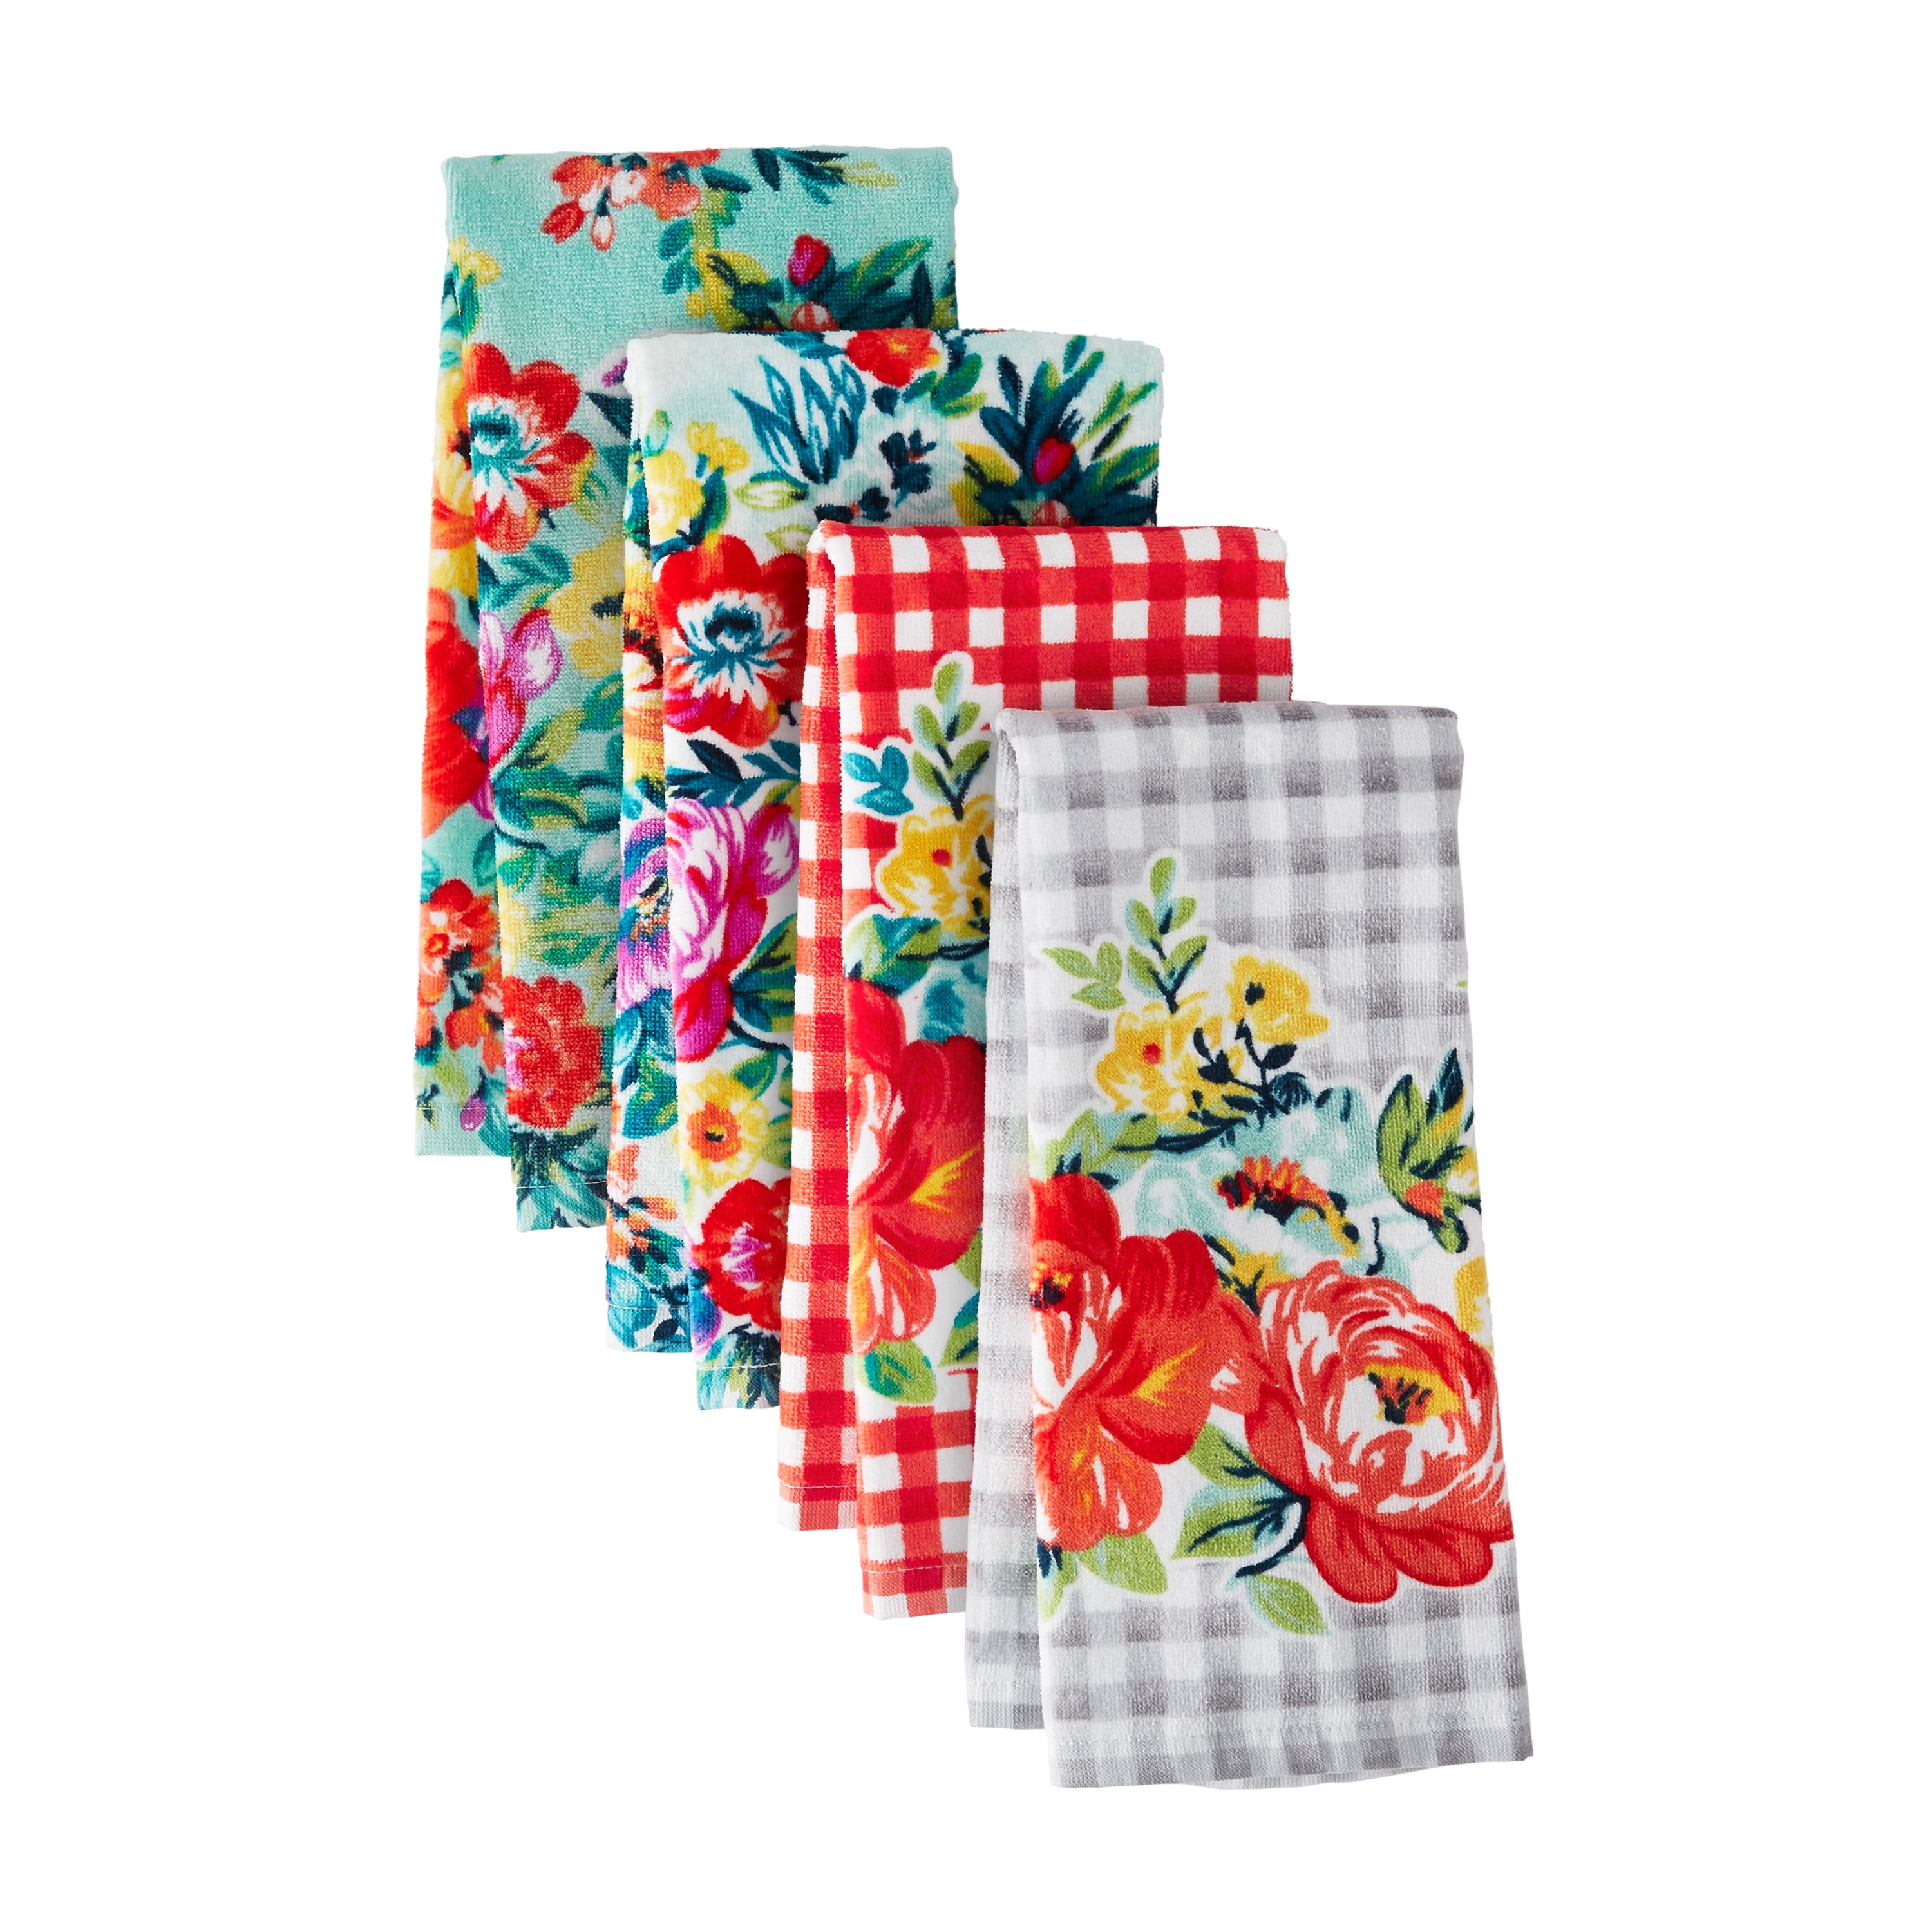 The Pioneer Woman Sweet Romance Kitchen Towel Set - Multicolor - 16 x 28 in